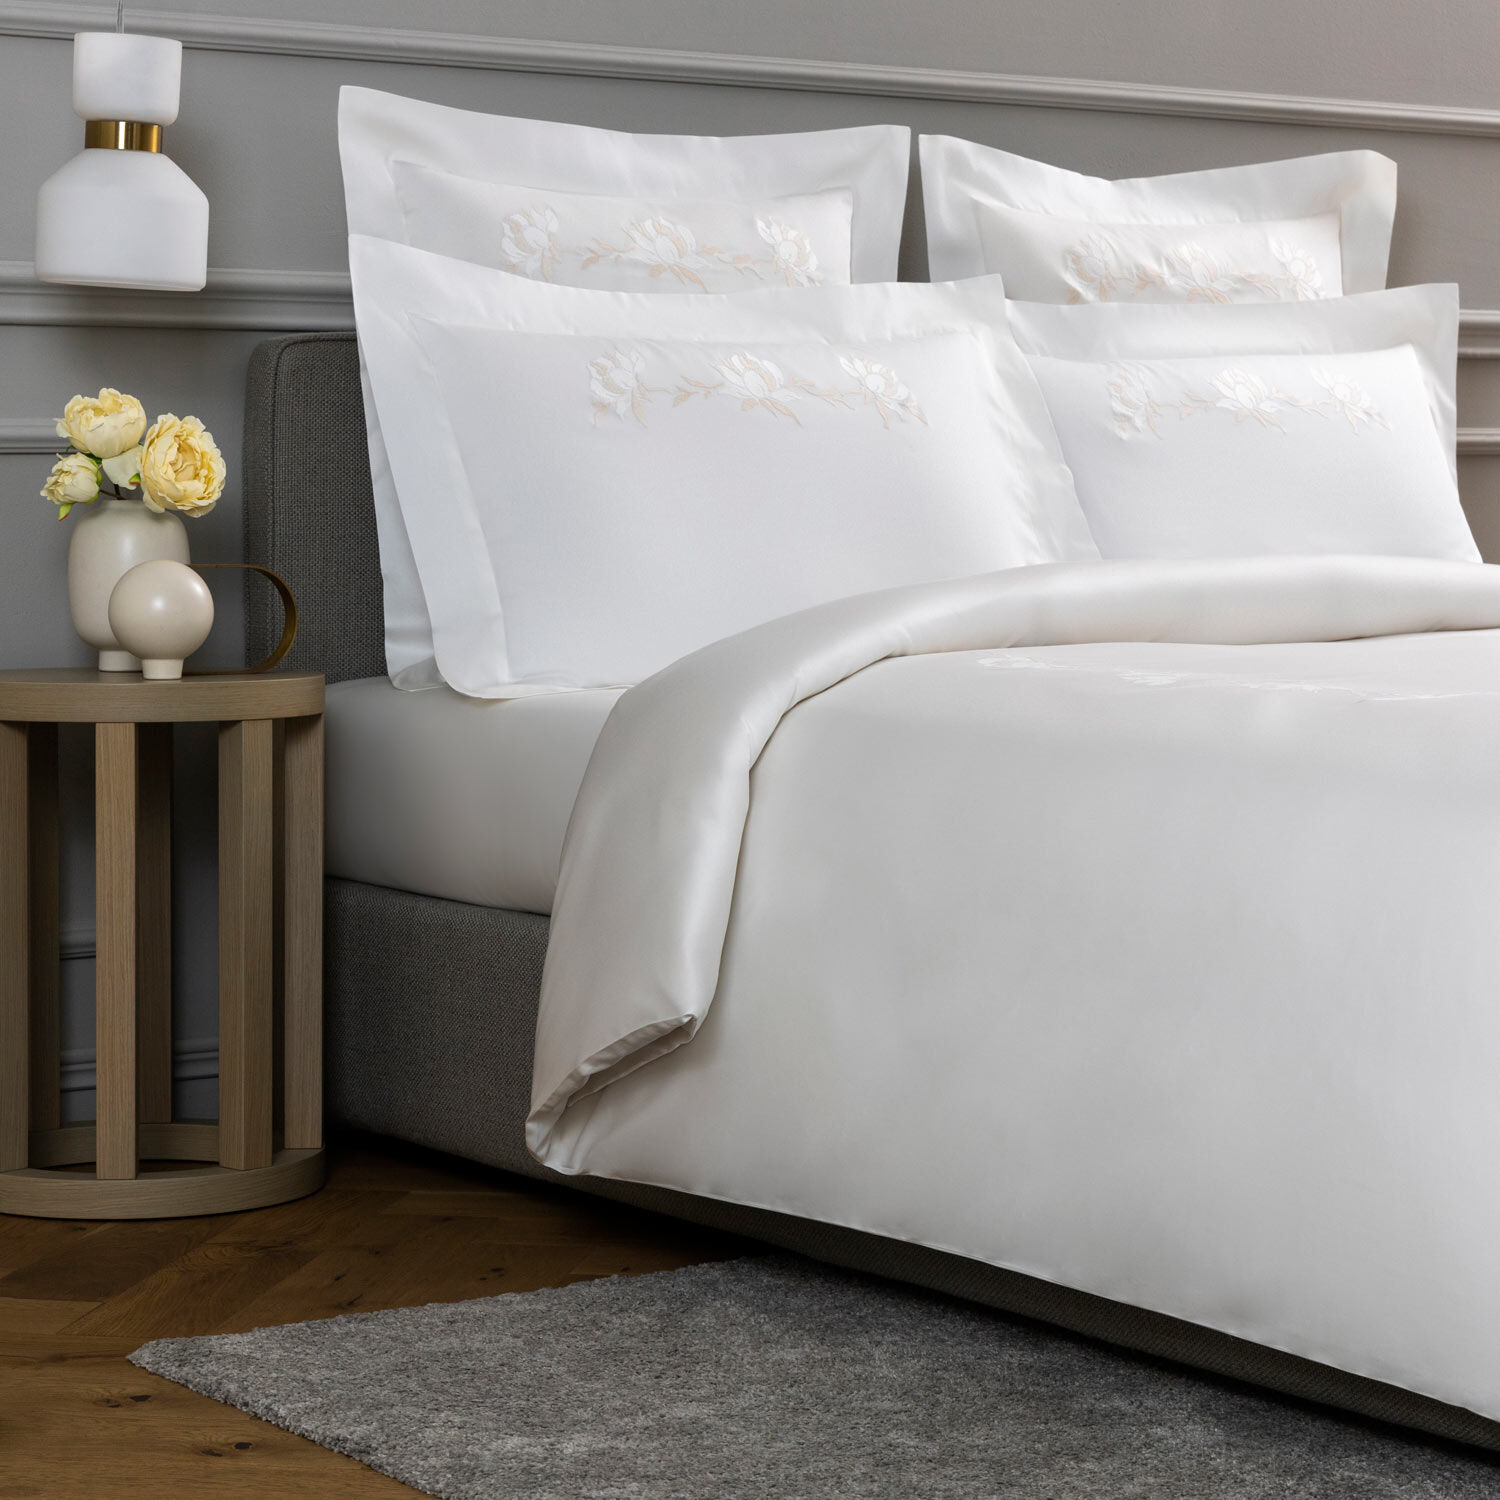 slide 2 Peonia Embroidered Duvet Cover